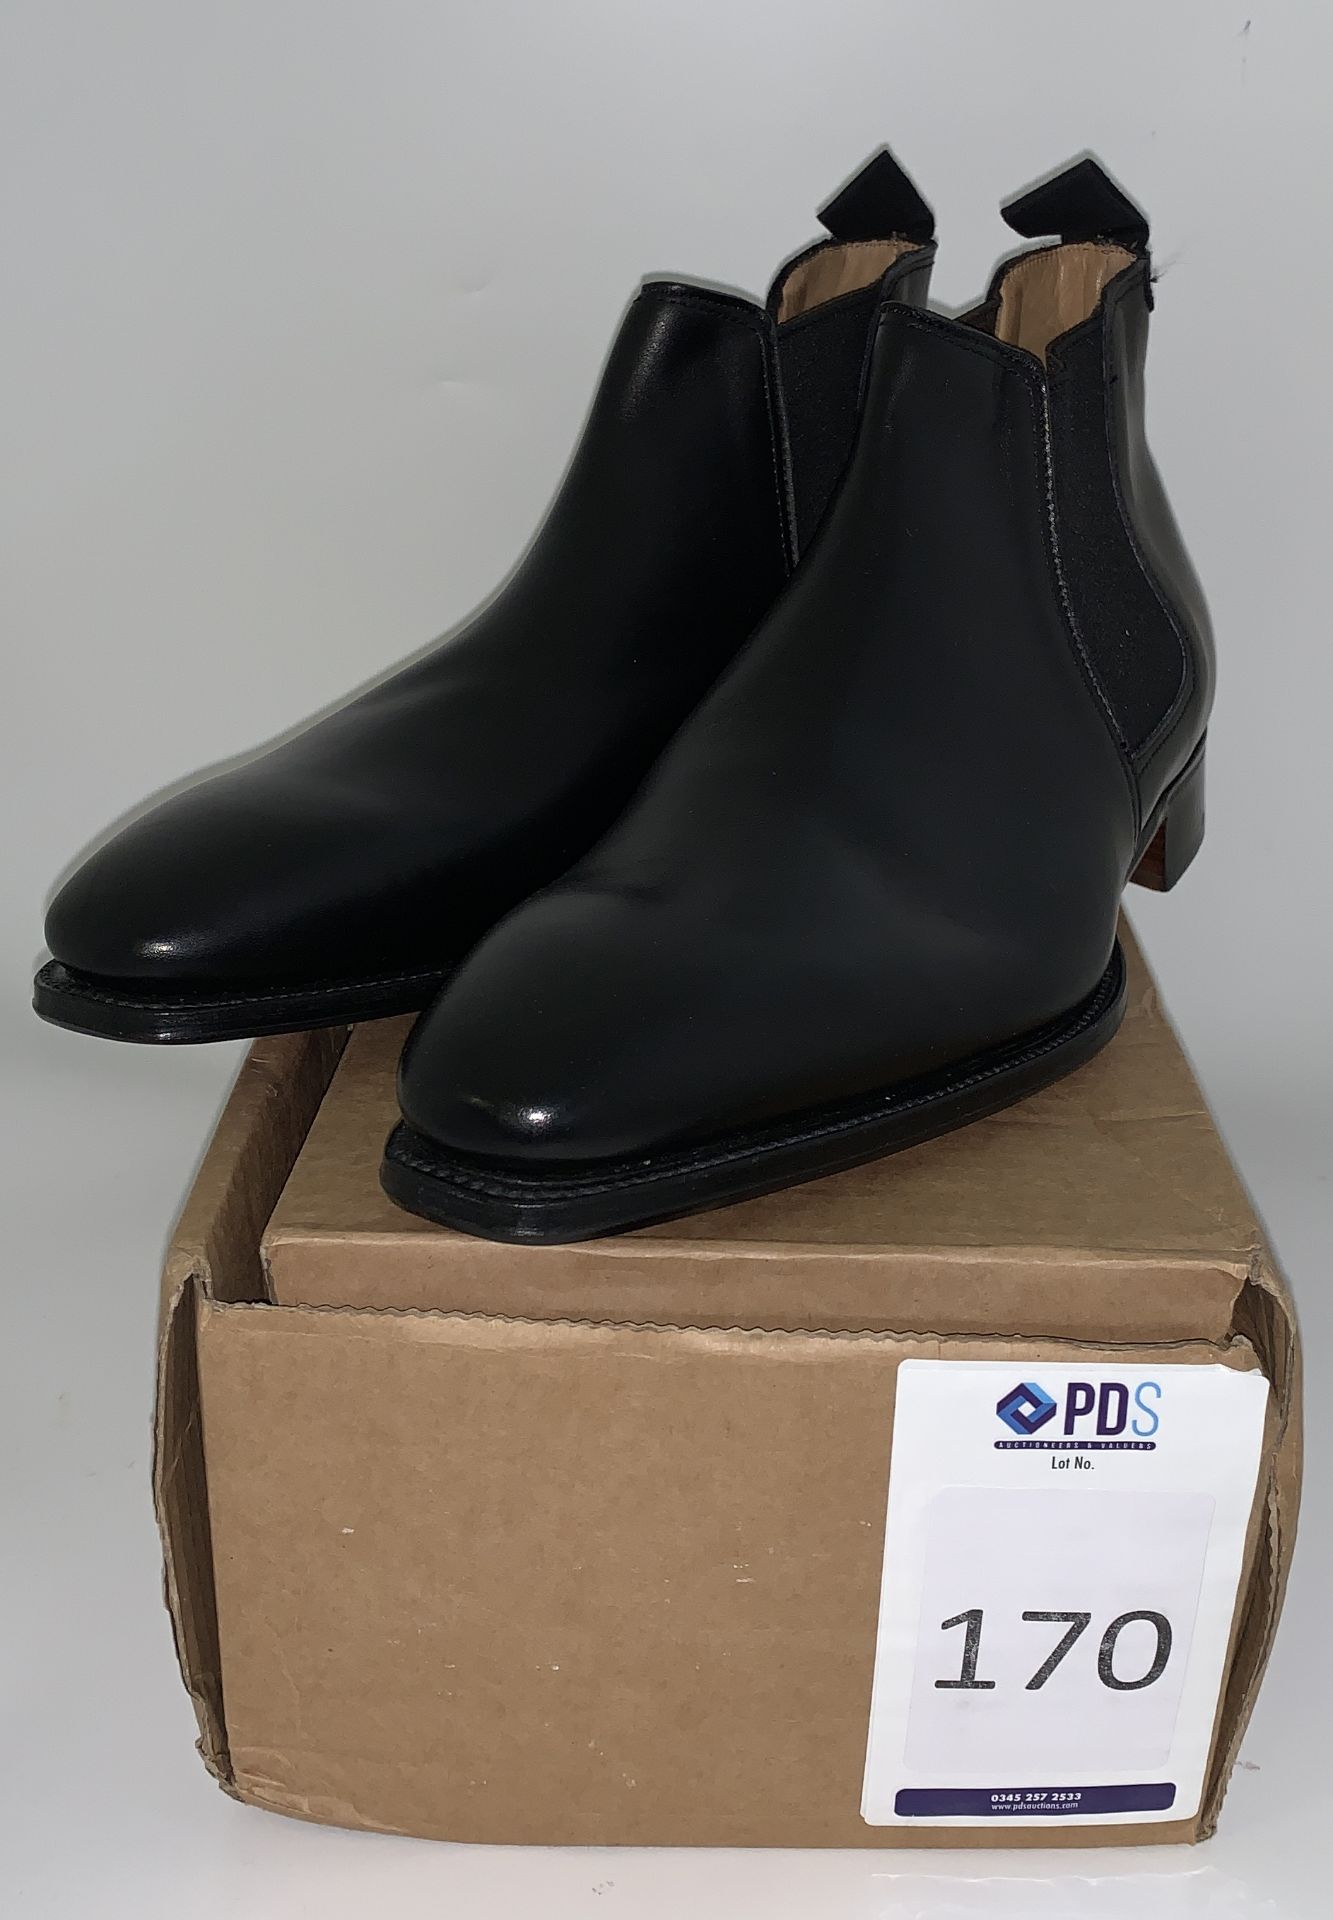 Pair of Alfred Sargent Owen Black Gusset Boot Size 8.5 (Slight Seconds) (Location: Brentwood – See